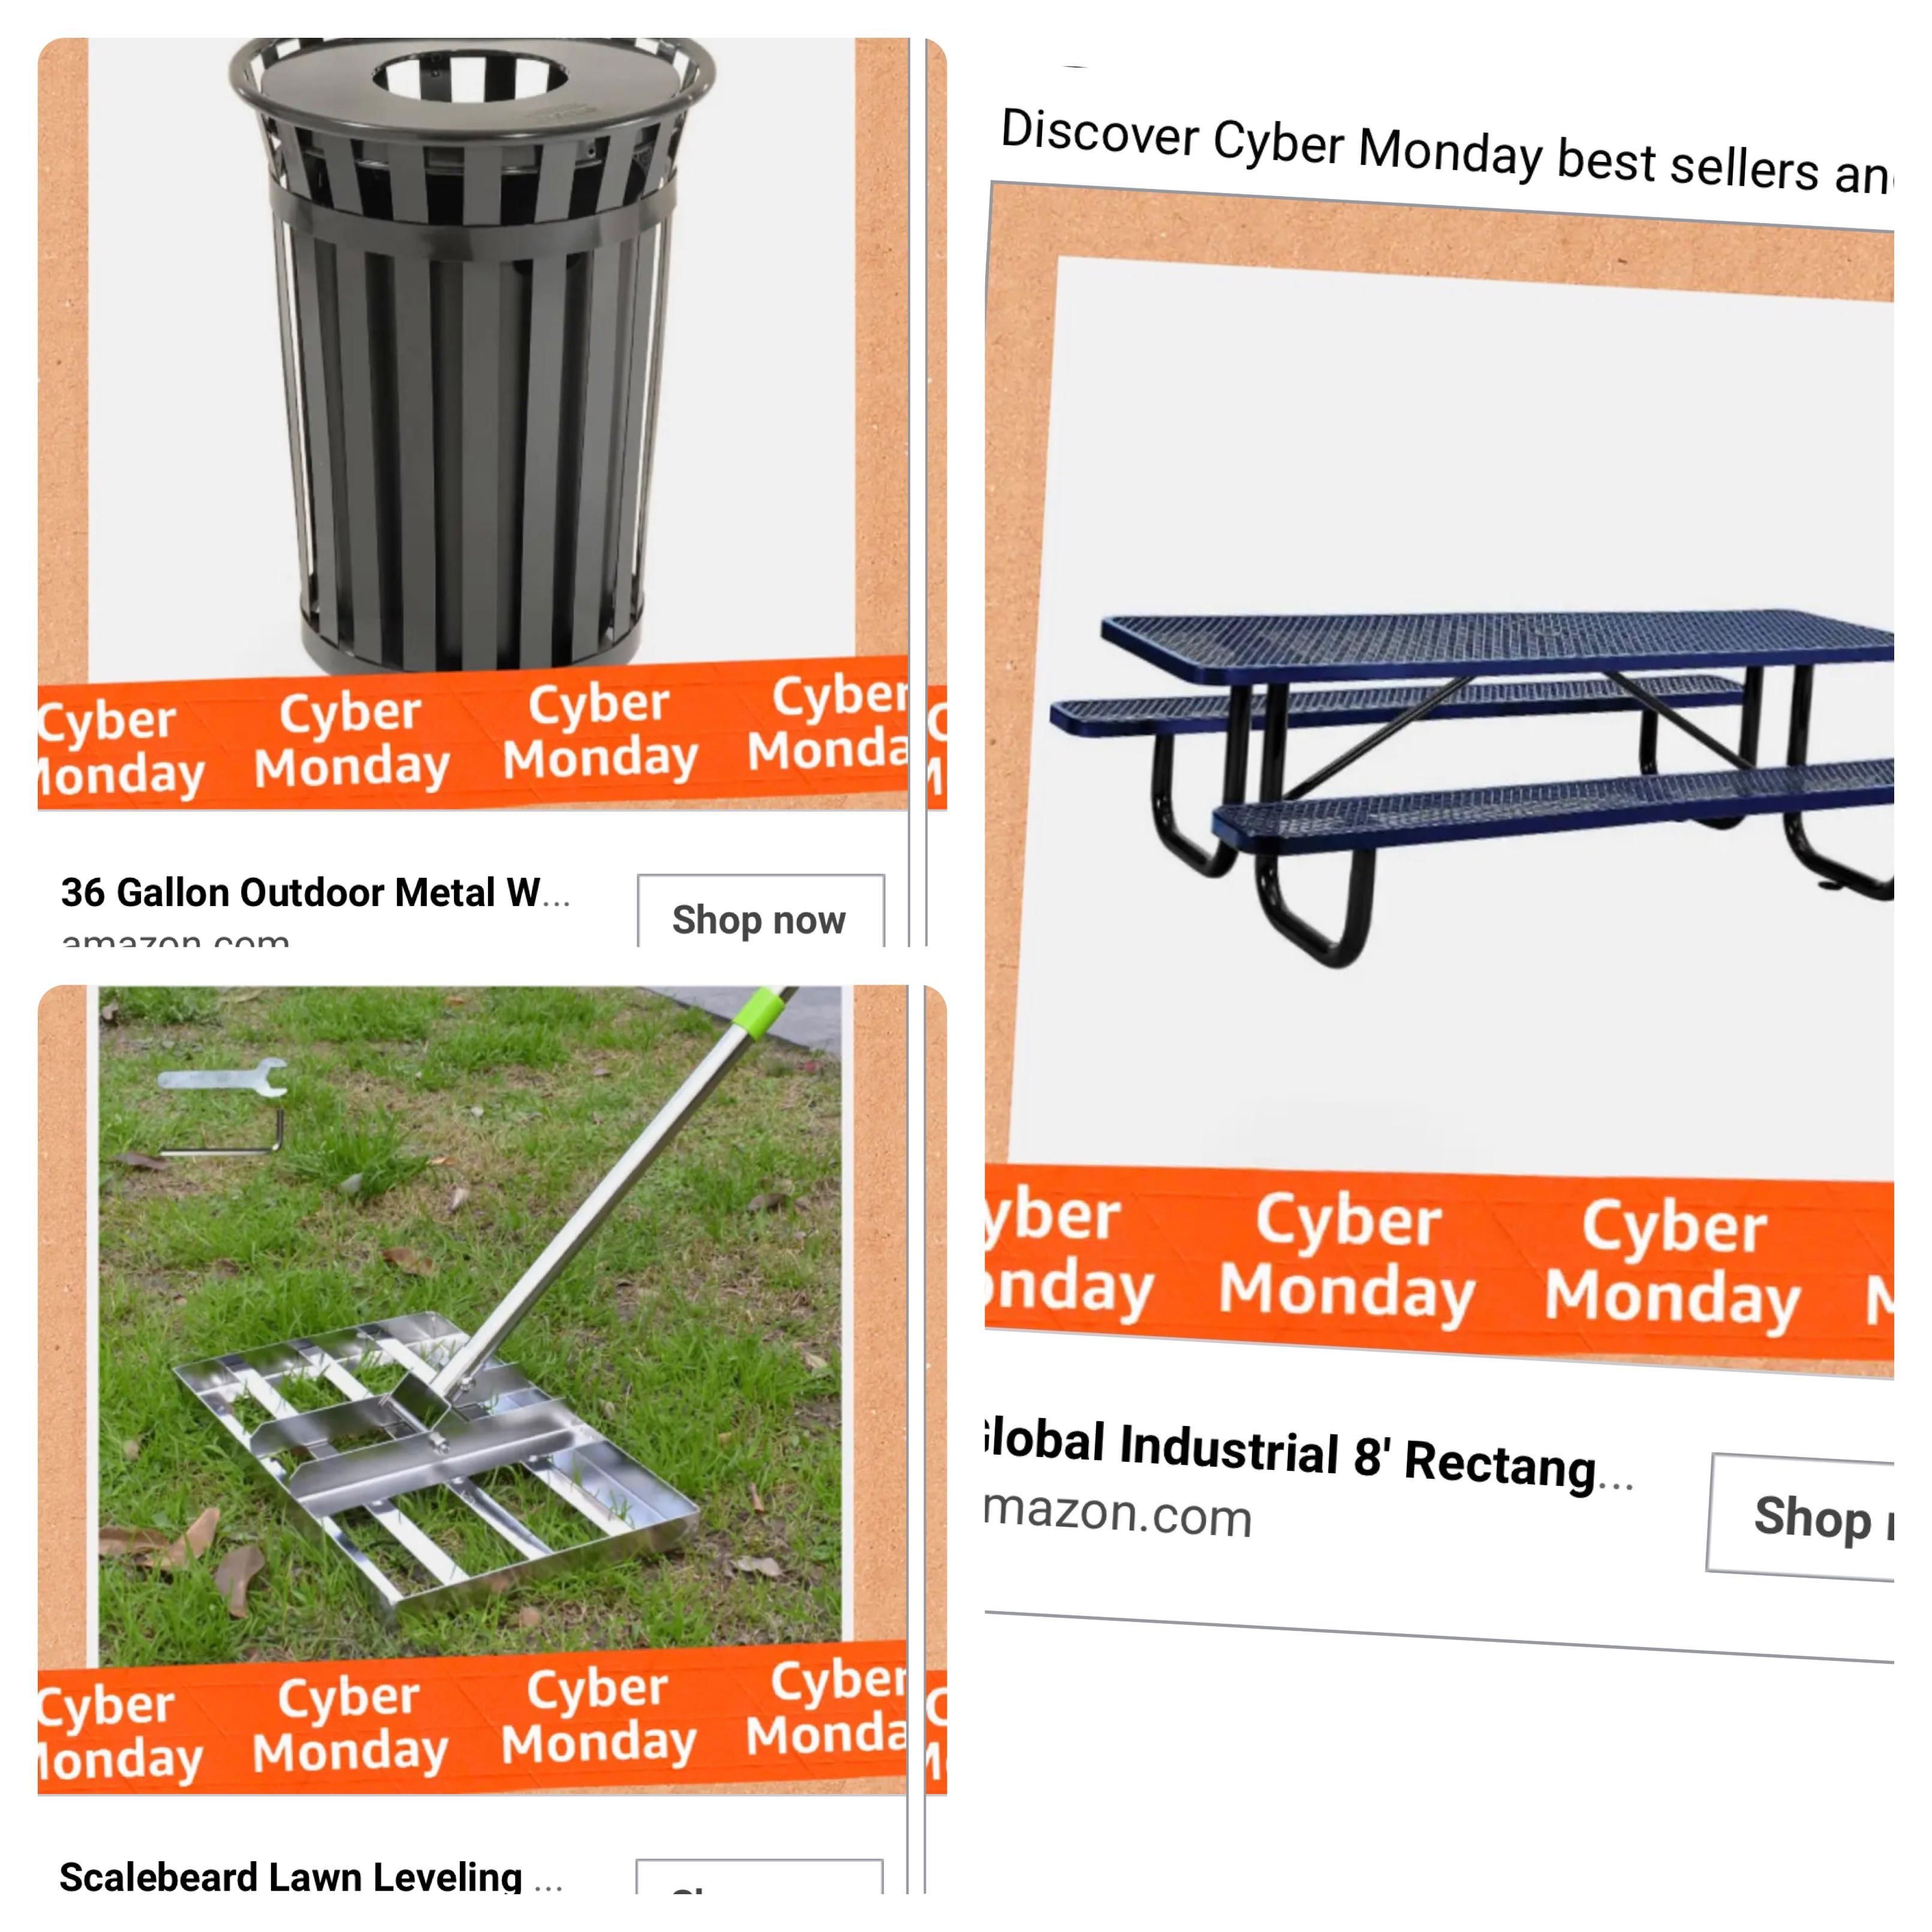 Amazon thinks I own a municipal park and wants me to buy it something nice on Monday.